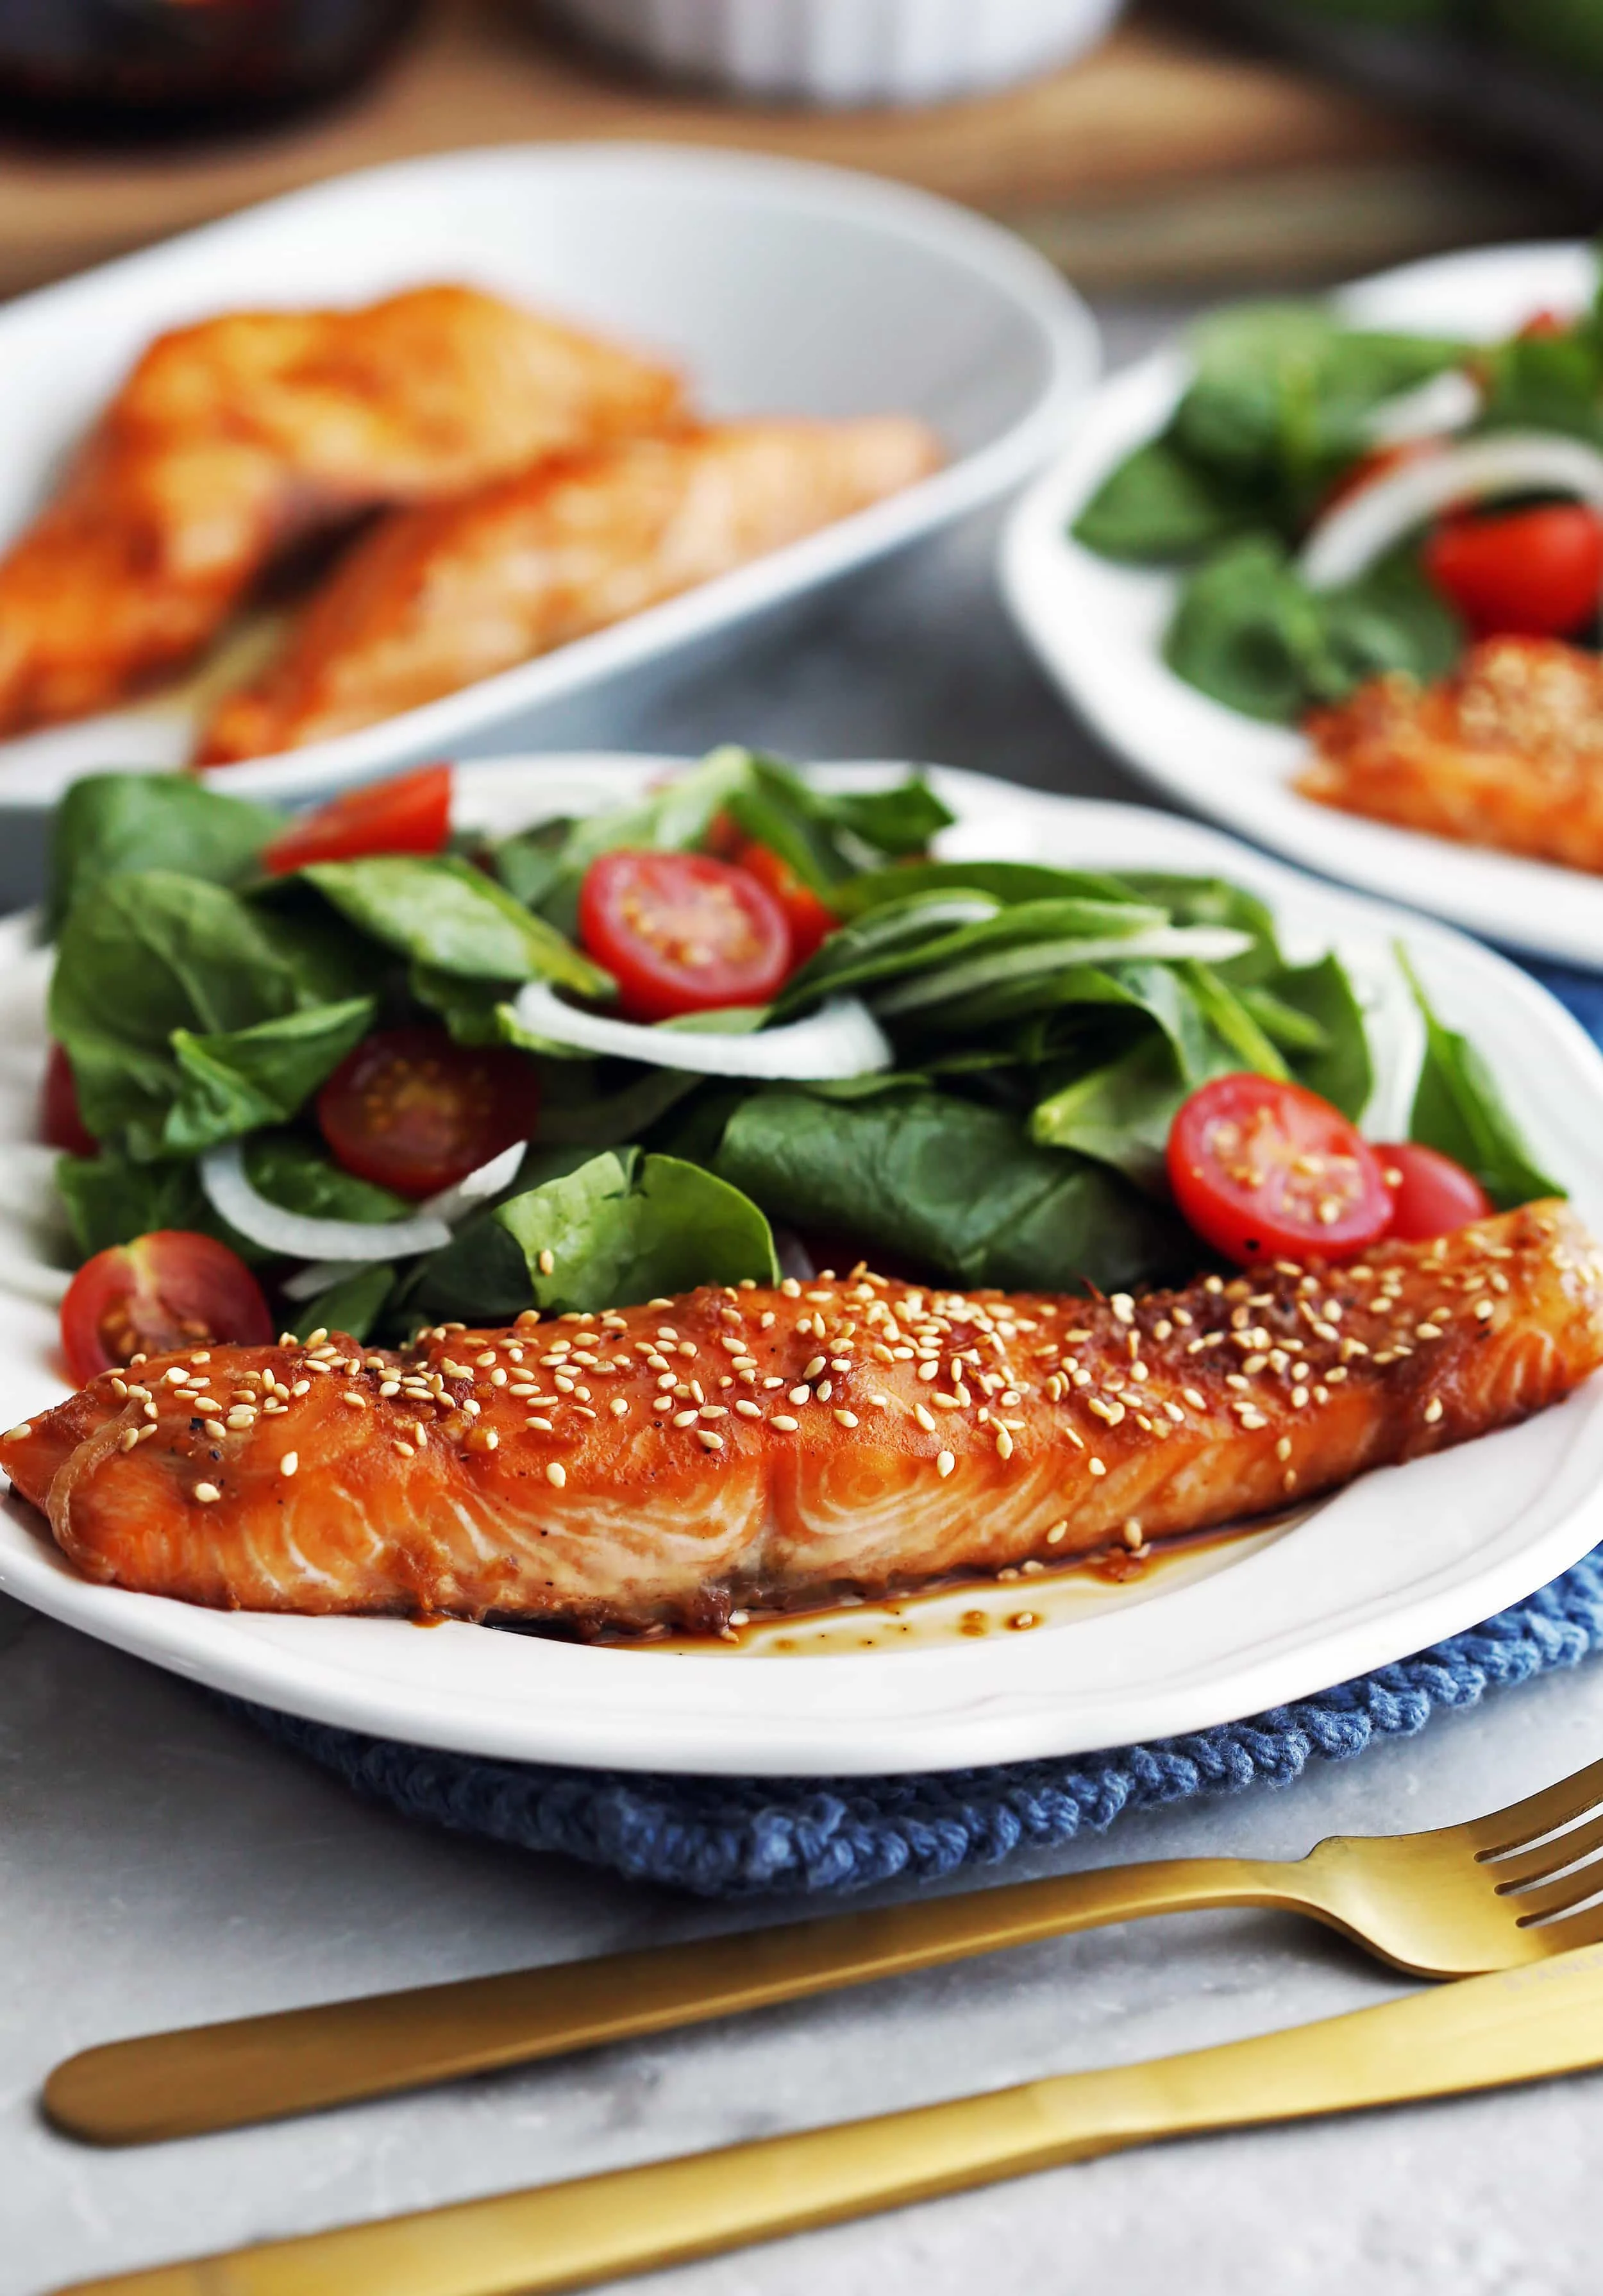 Maple-Soy Baked Salmon topped with sesame seeds with green spinach salad on a white plate.